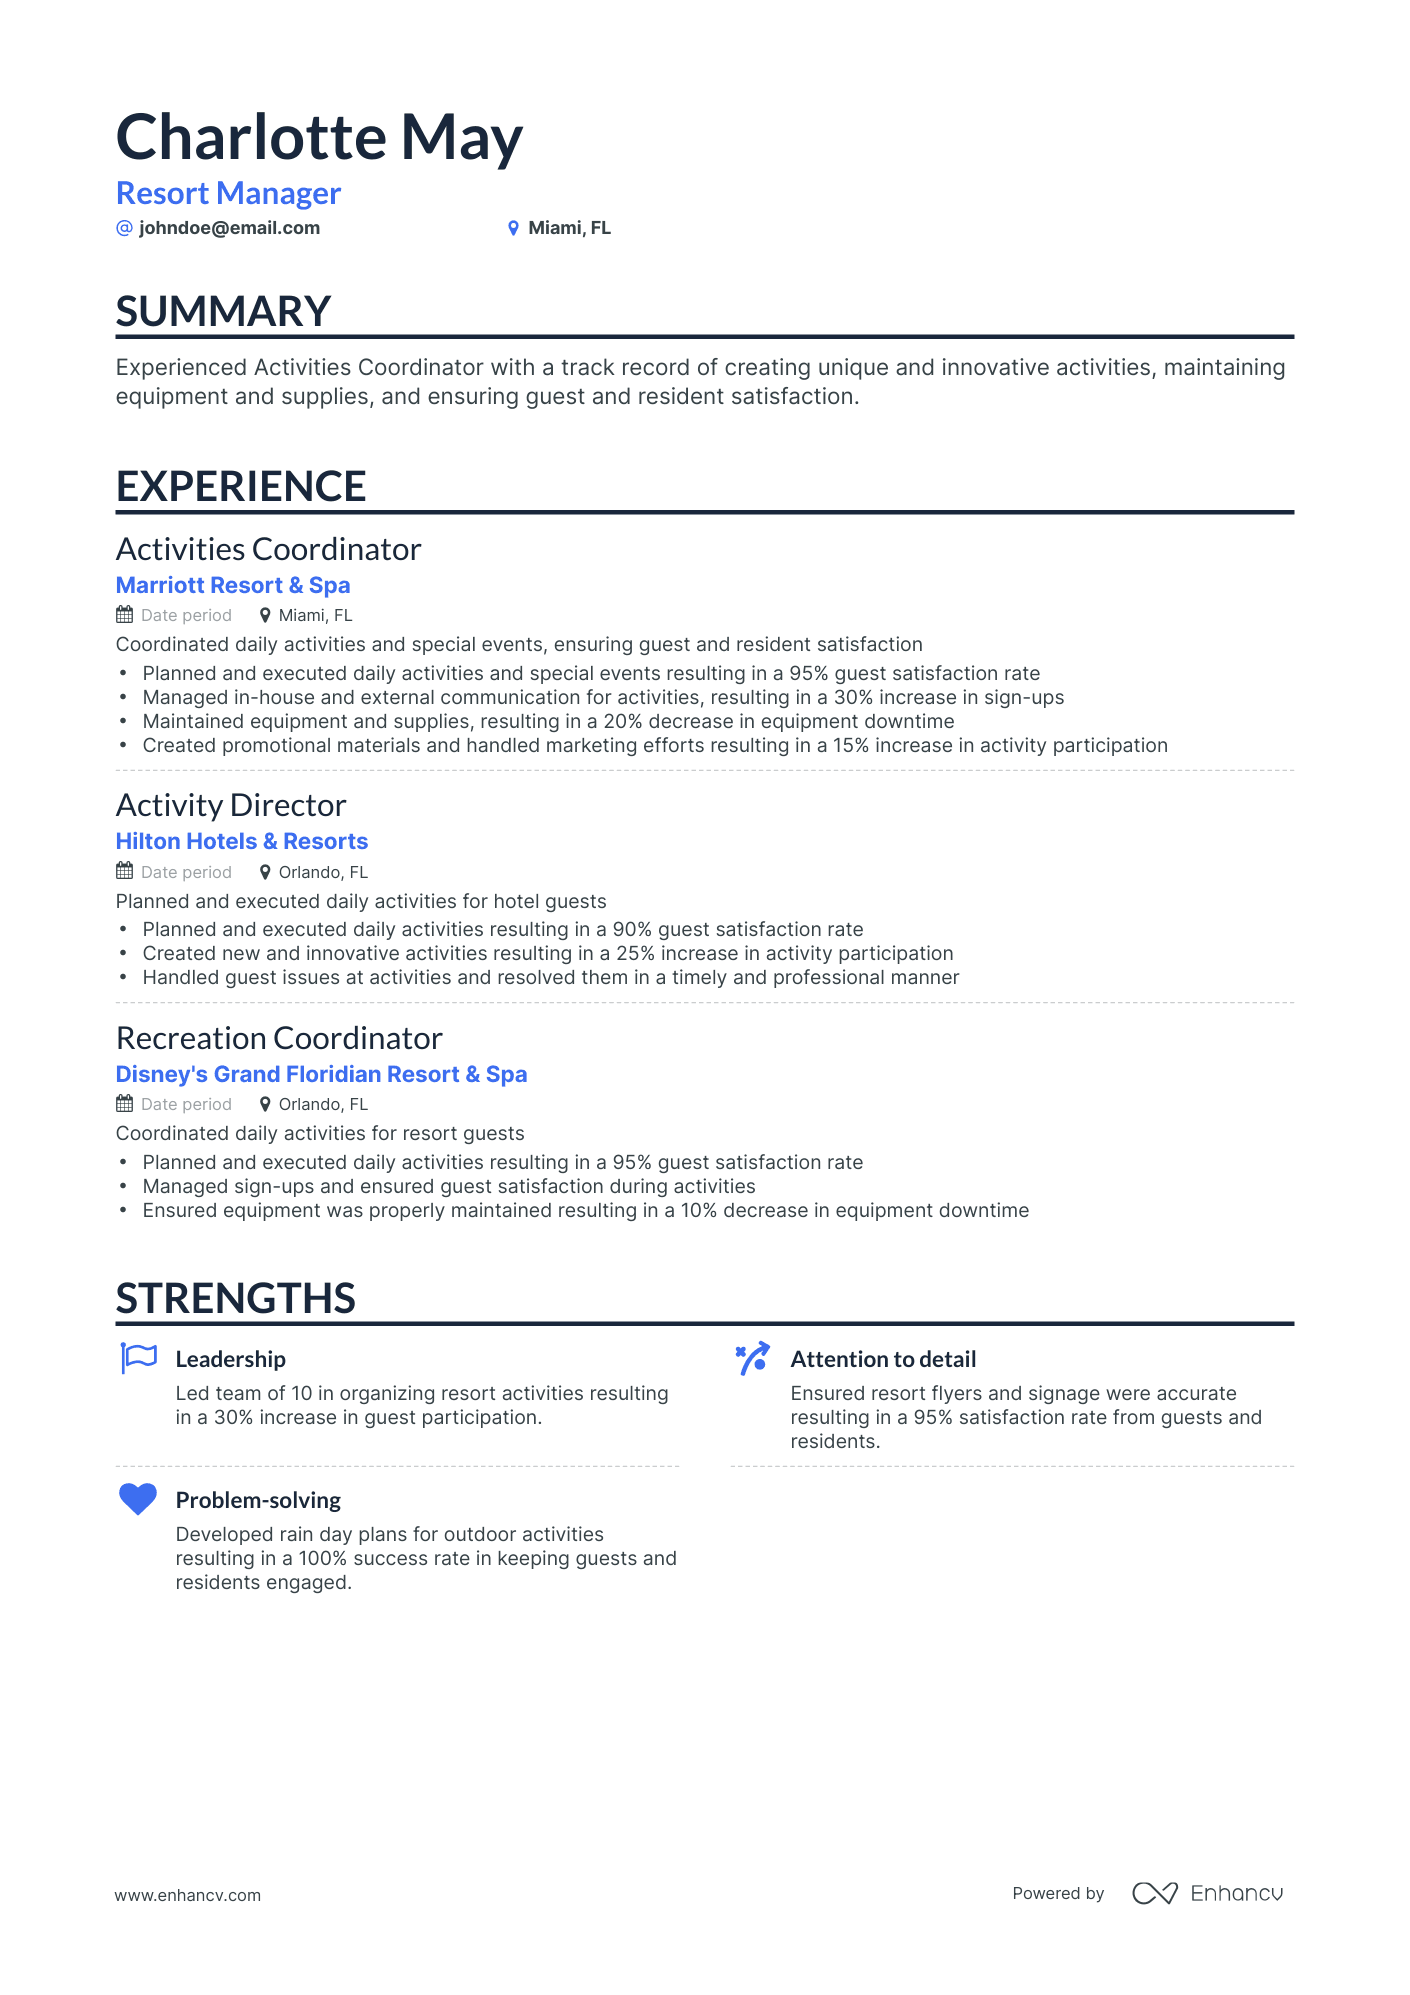 Classic Resort Manager Resume Template